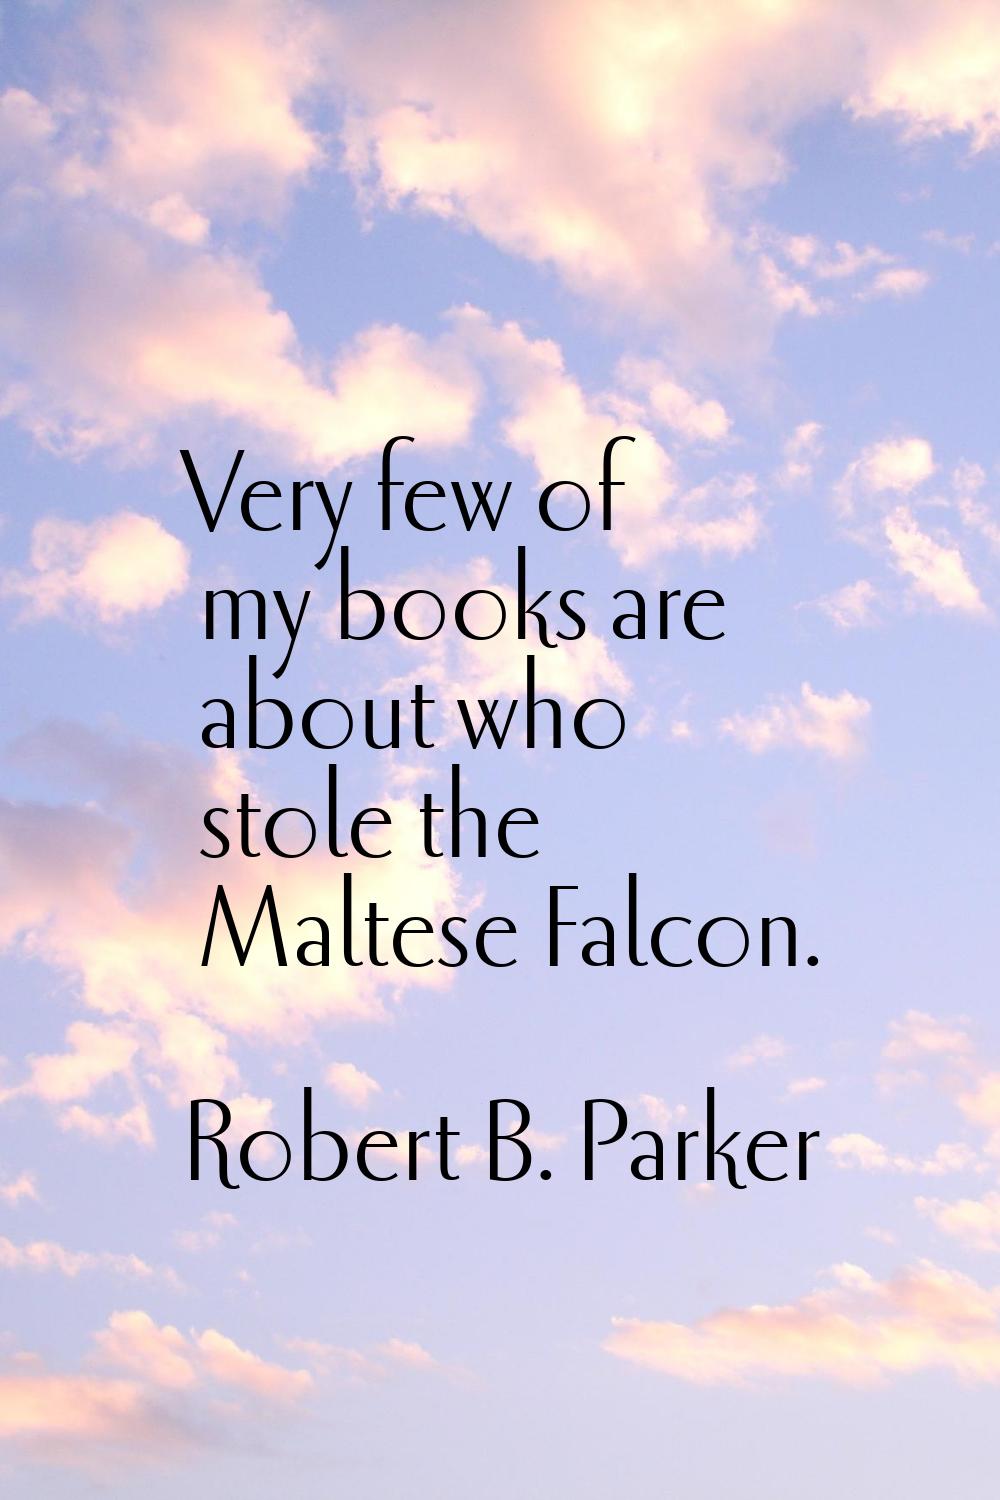 Very few of my books are about who stole the Maltese Falcon.